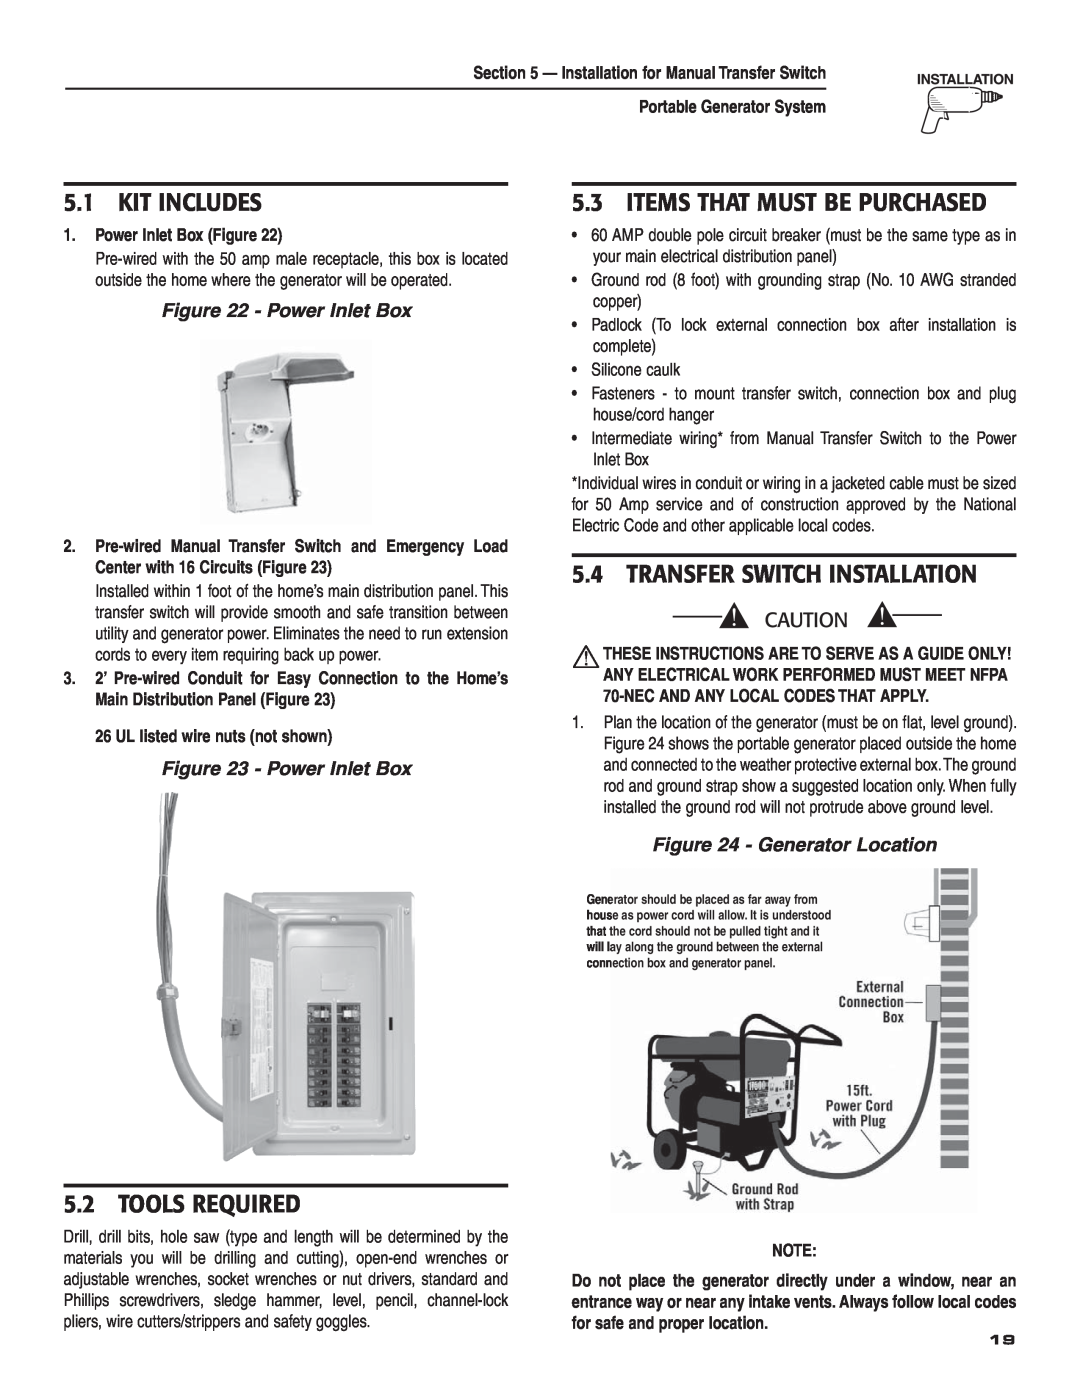 Guardian Technologies 004583-0 Kit Includes, Tools Required, Items That Must Be Purchased, Transfer Switch Installation 